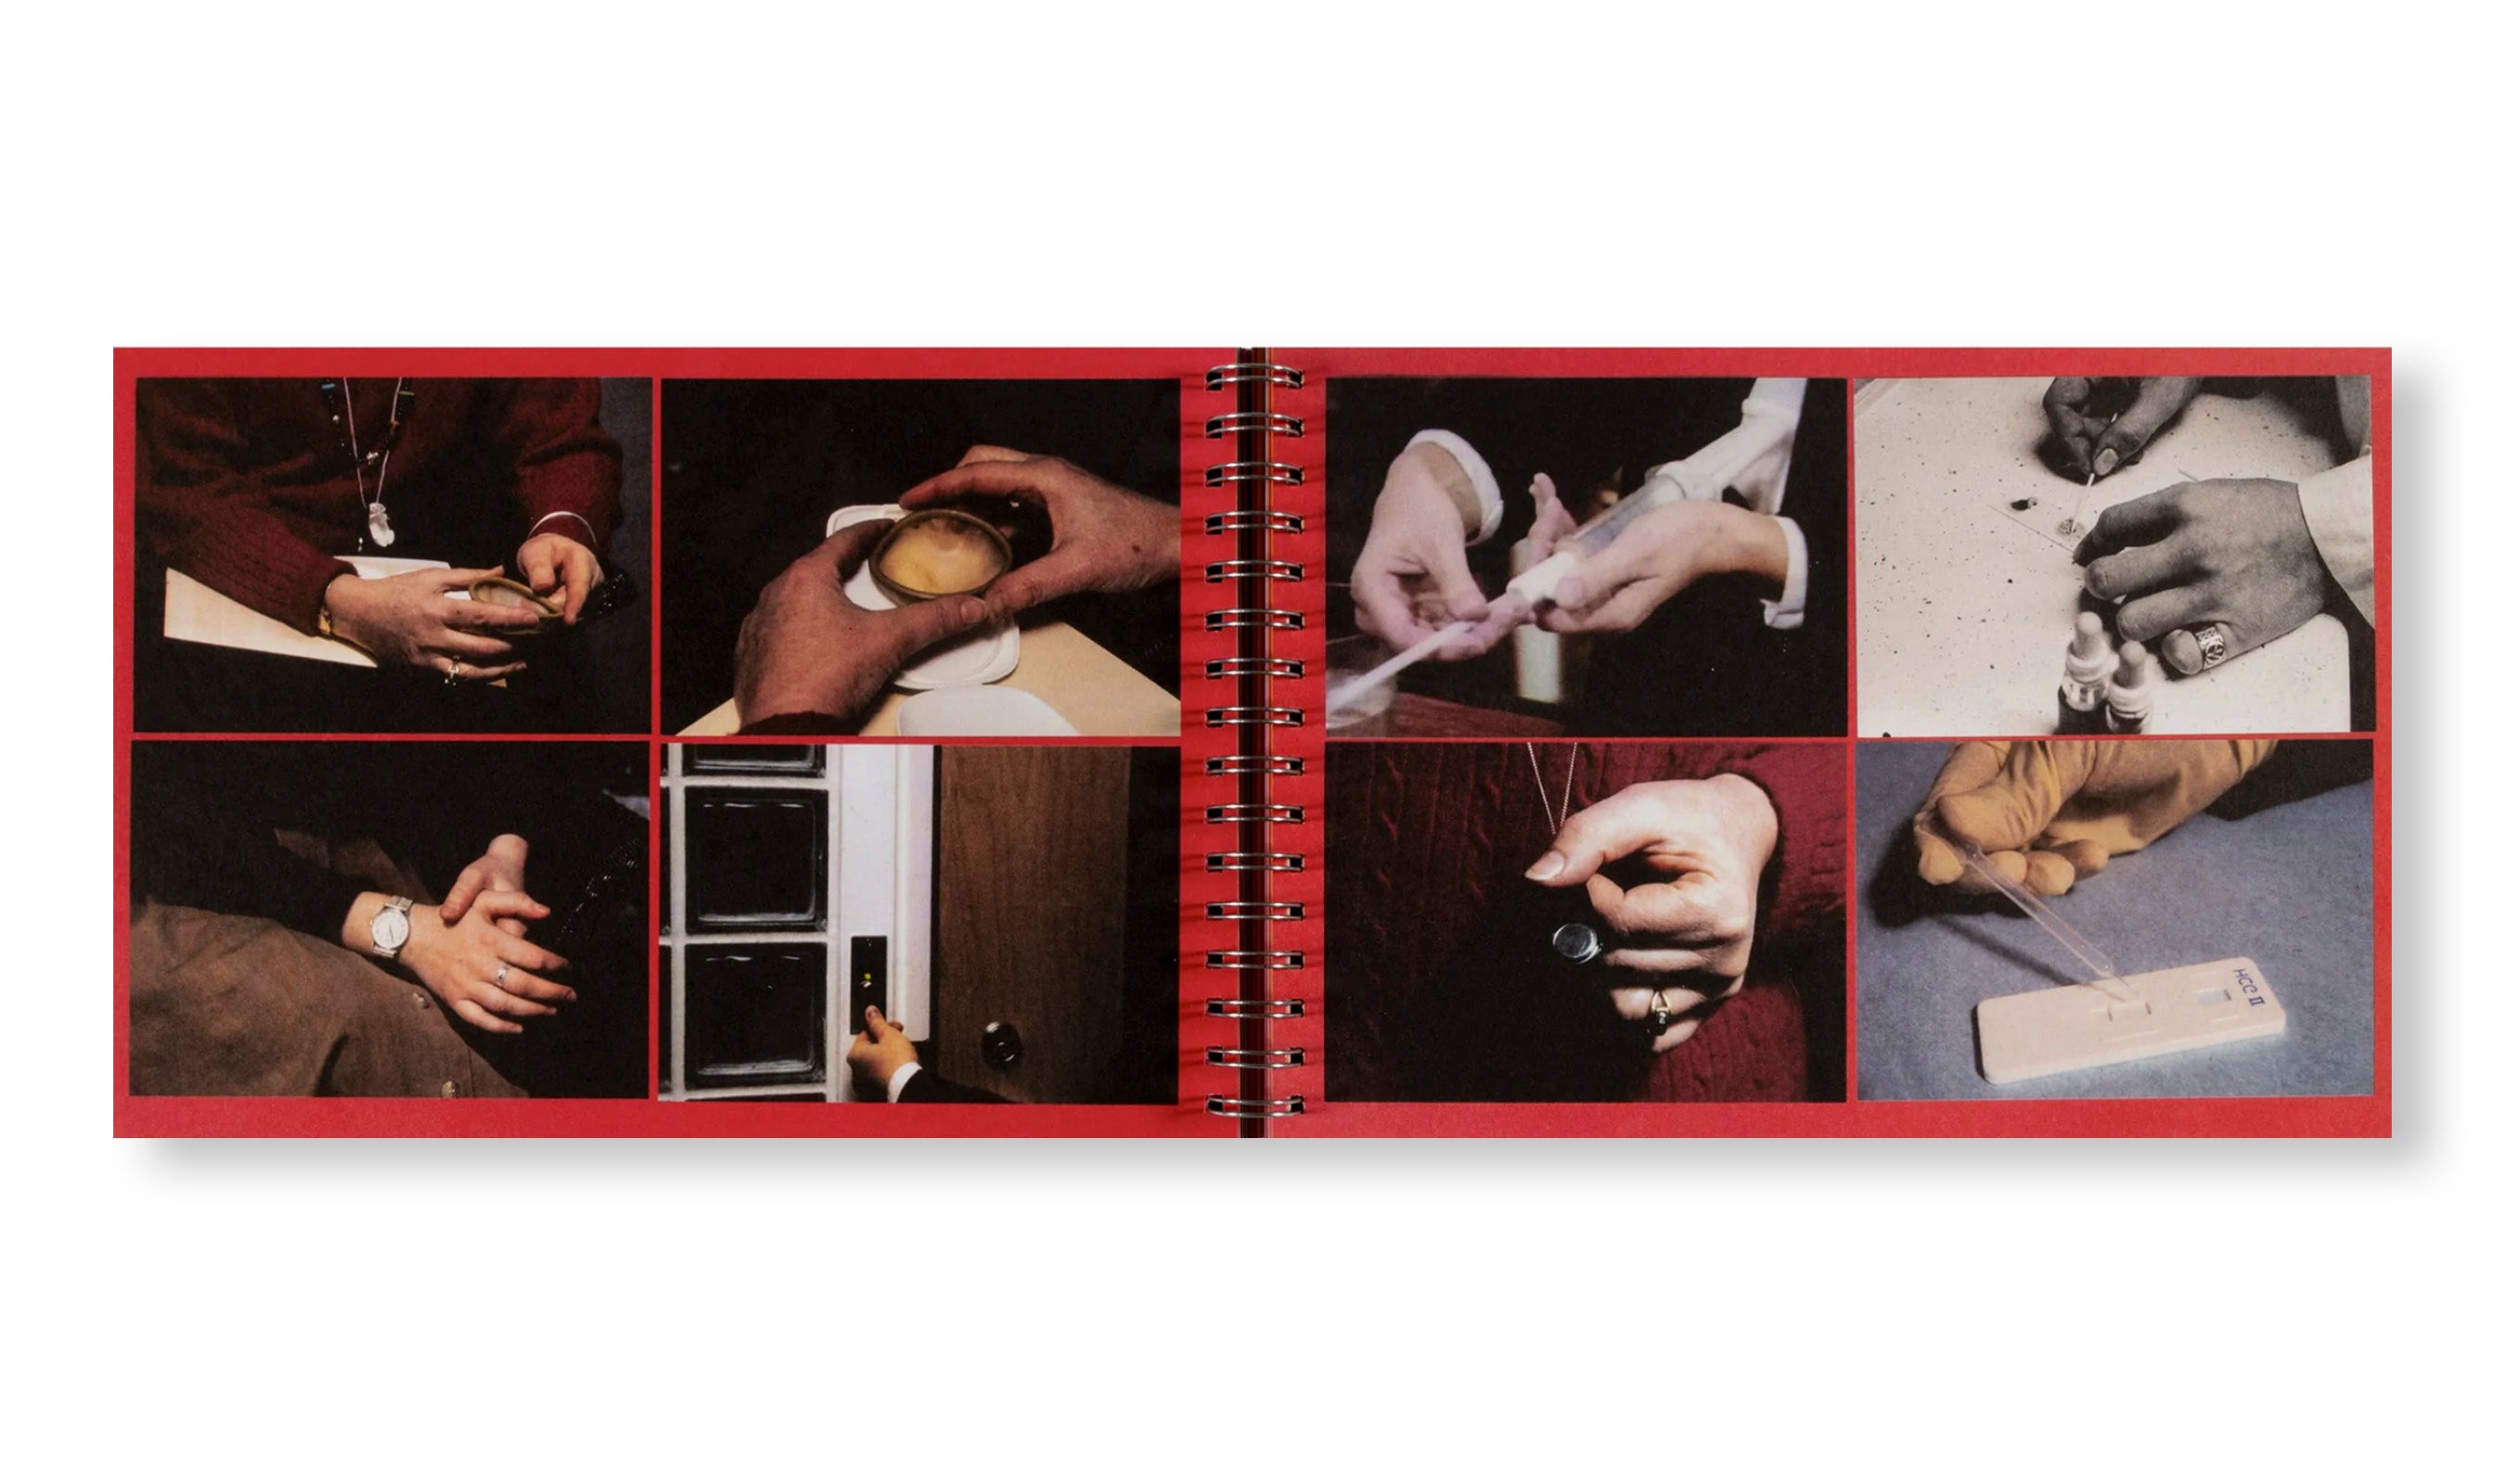 THE LAST SAFE ABORTION by Carmen Winant